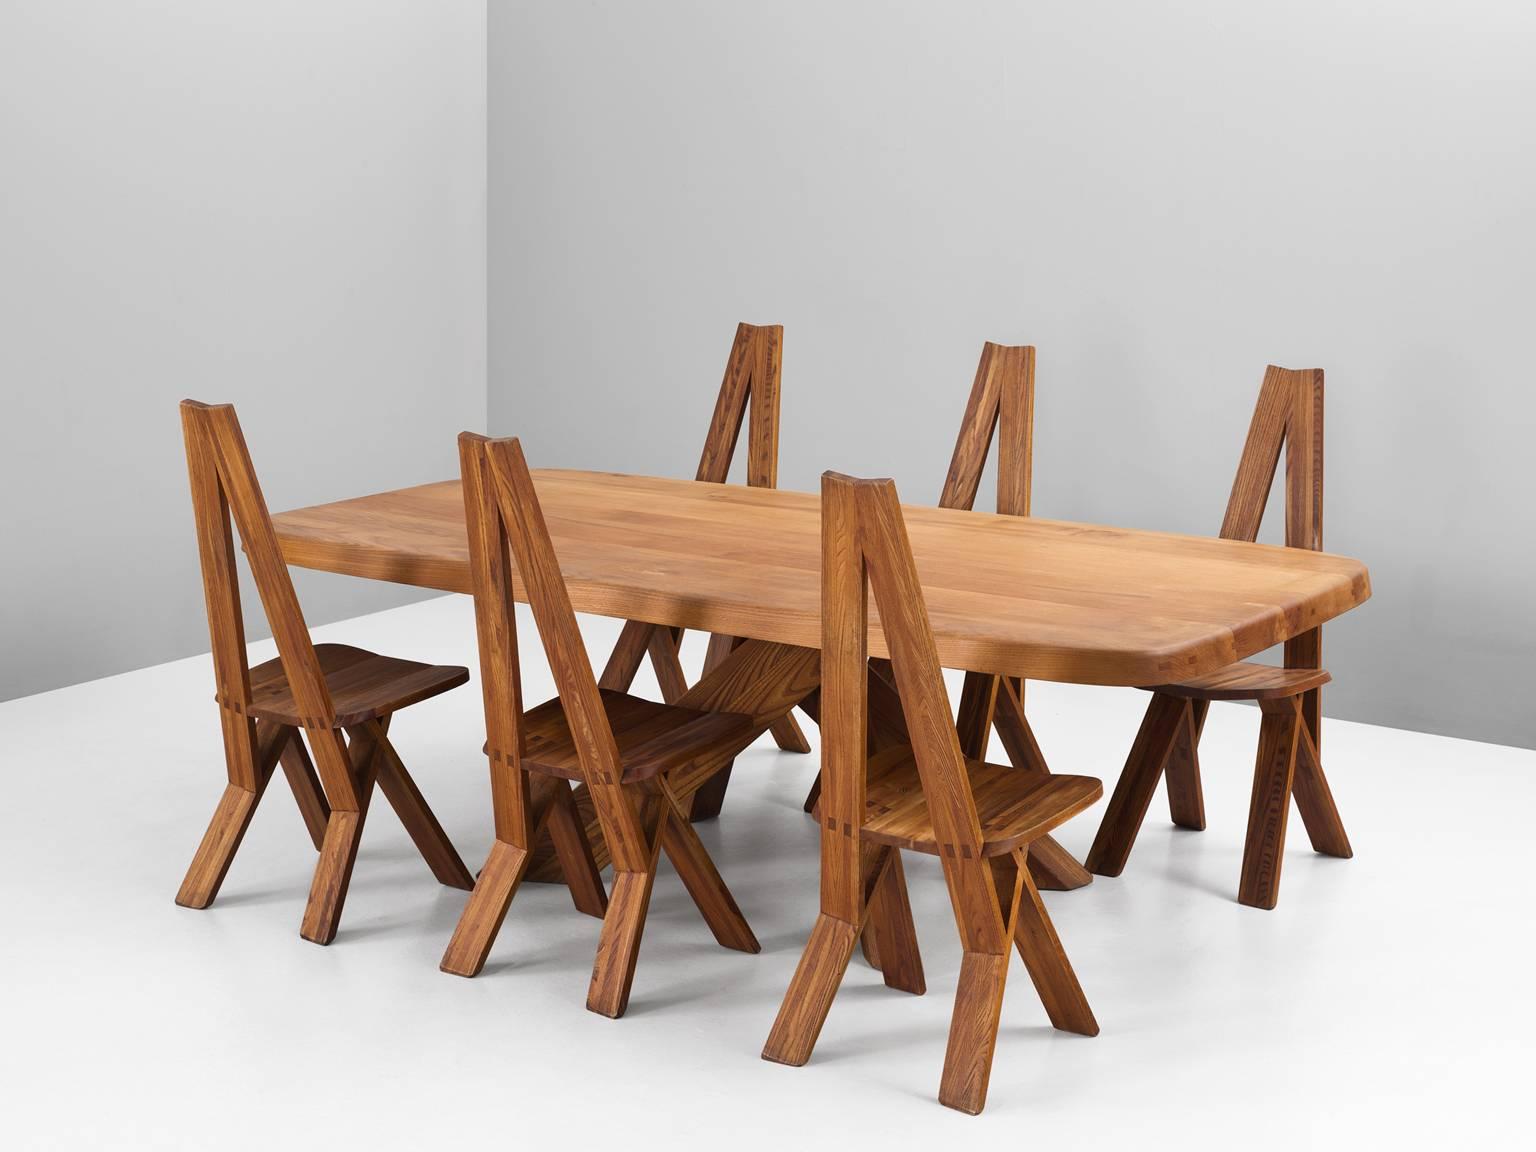 Dining room set, in elm, by Pierre Chapo, France, 1960s.

A highly rare dining room set, consisting of six 'S45' chairs and matching rectangular table model 'T35D.' Well-crafted in solid.

These extraordinary chairs are in excellent condition,